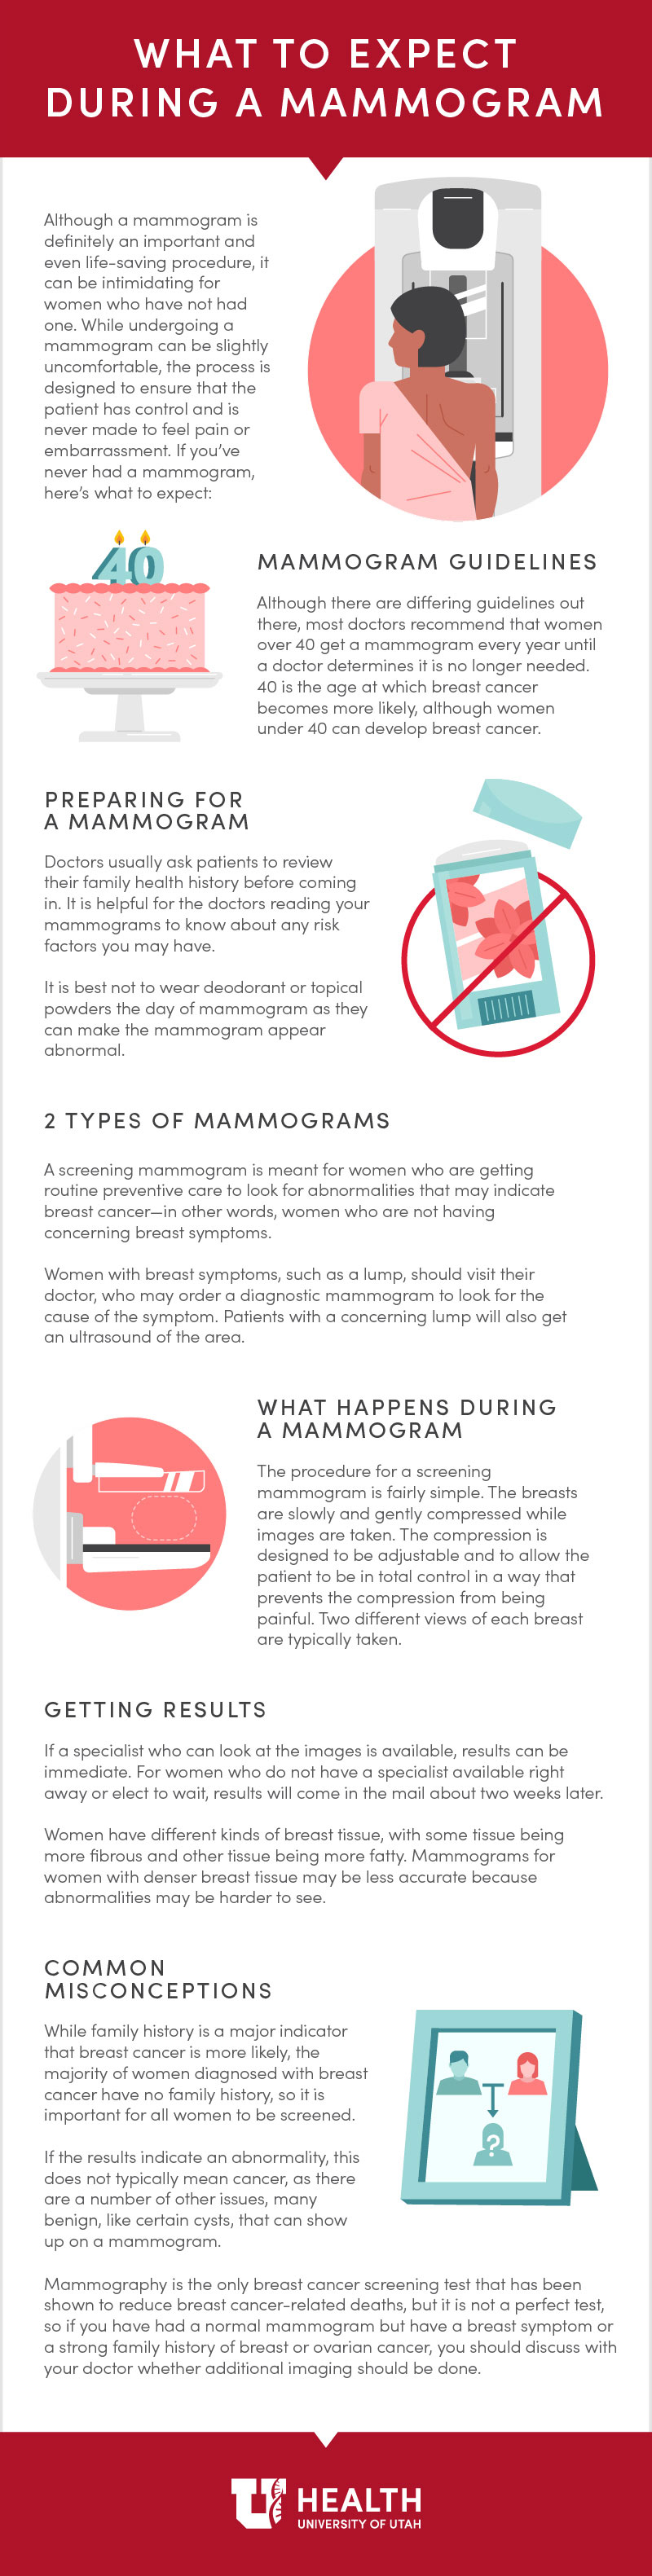 What to expect at a mammogram, an infographic